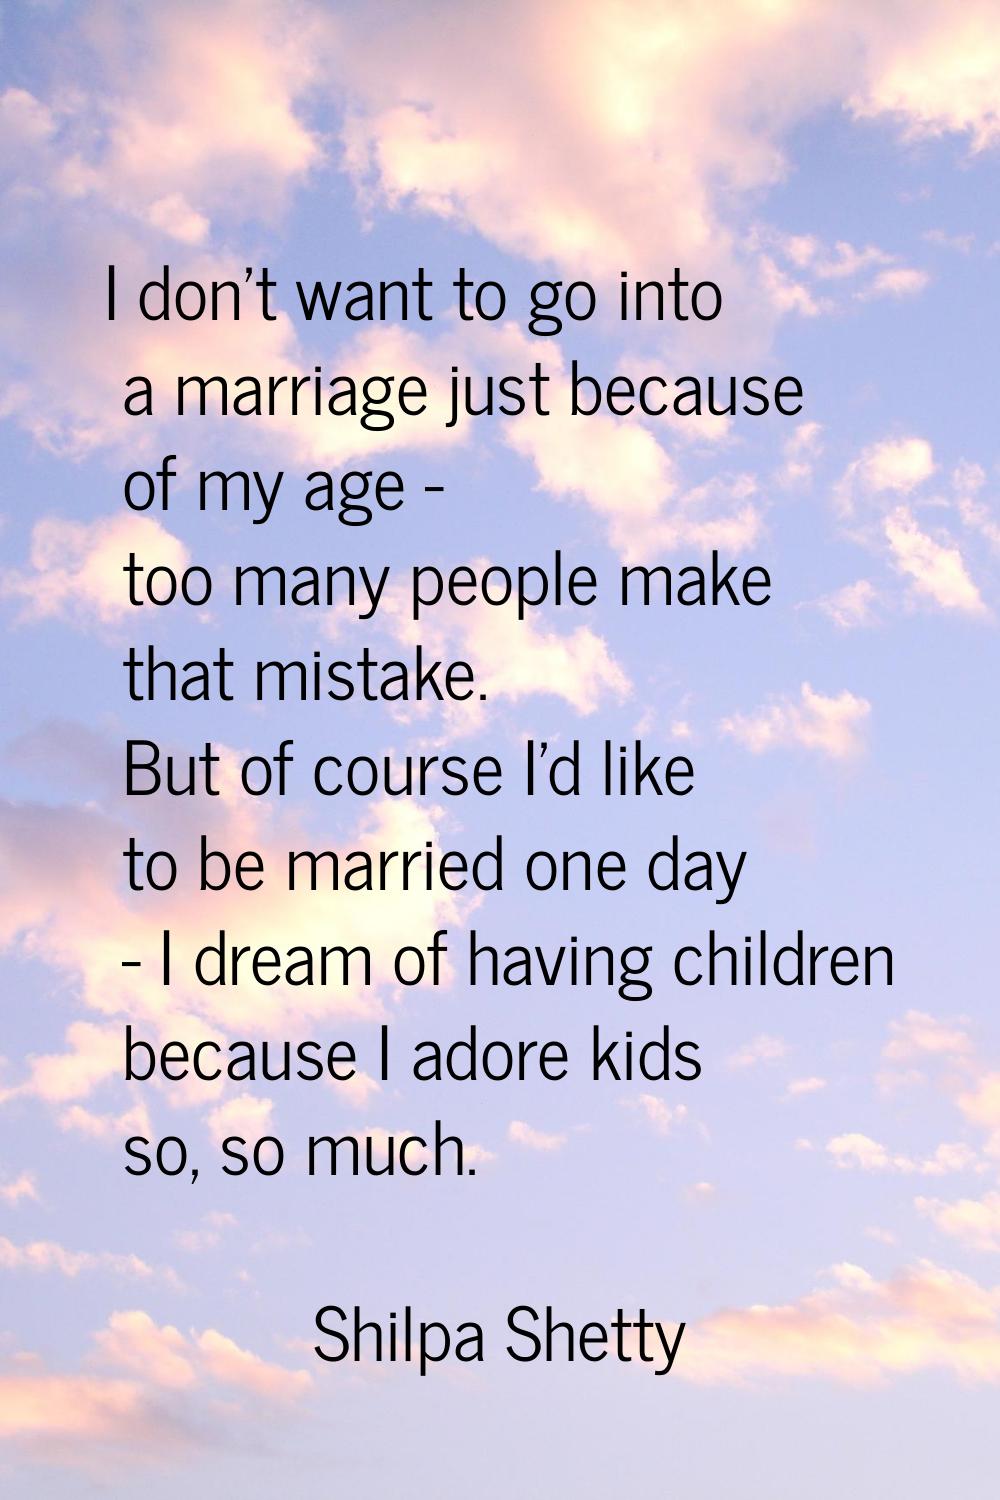 I don't want to go into a marriage just because of my age - too many people make that mistake. But 